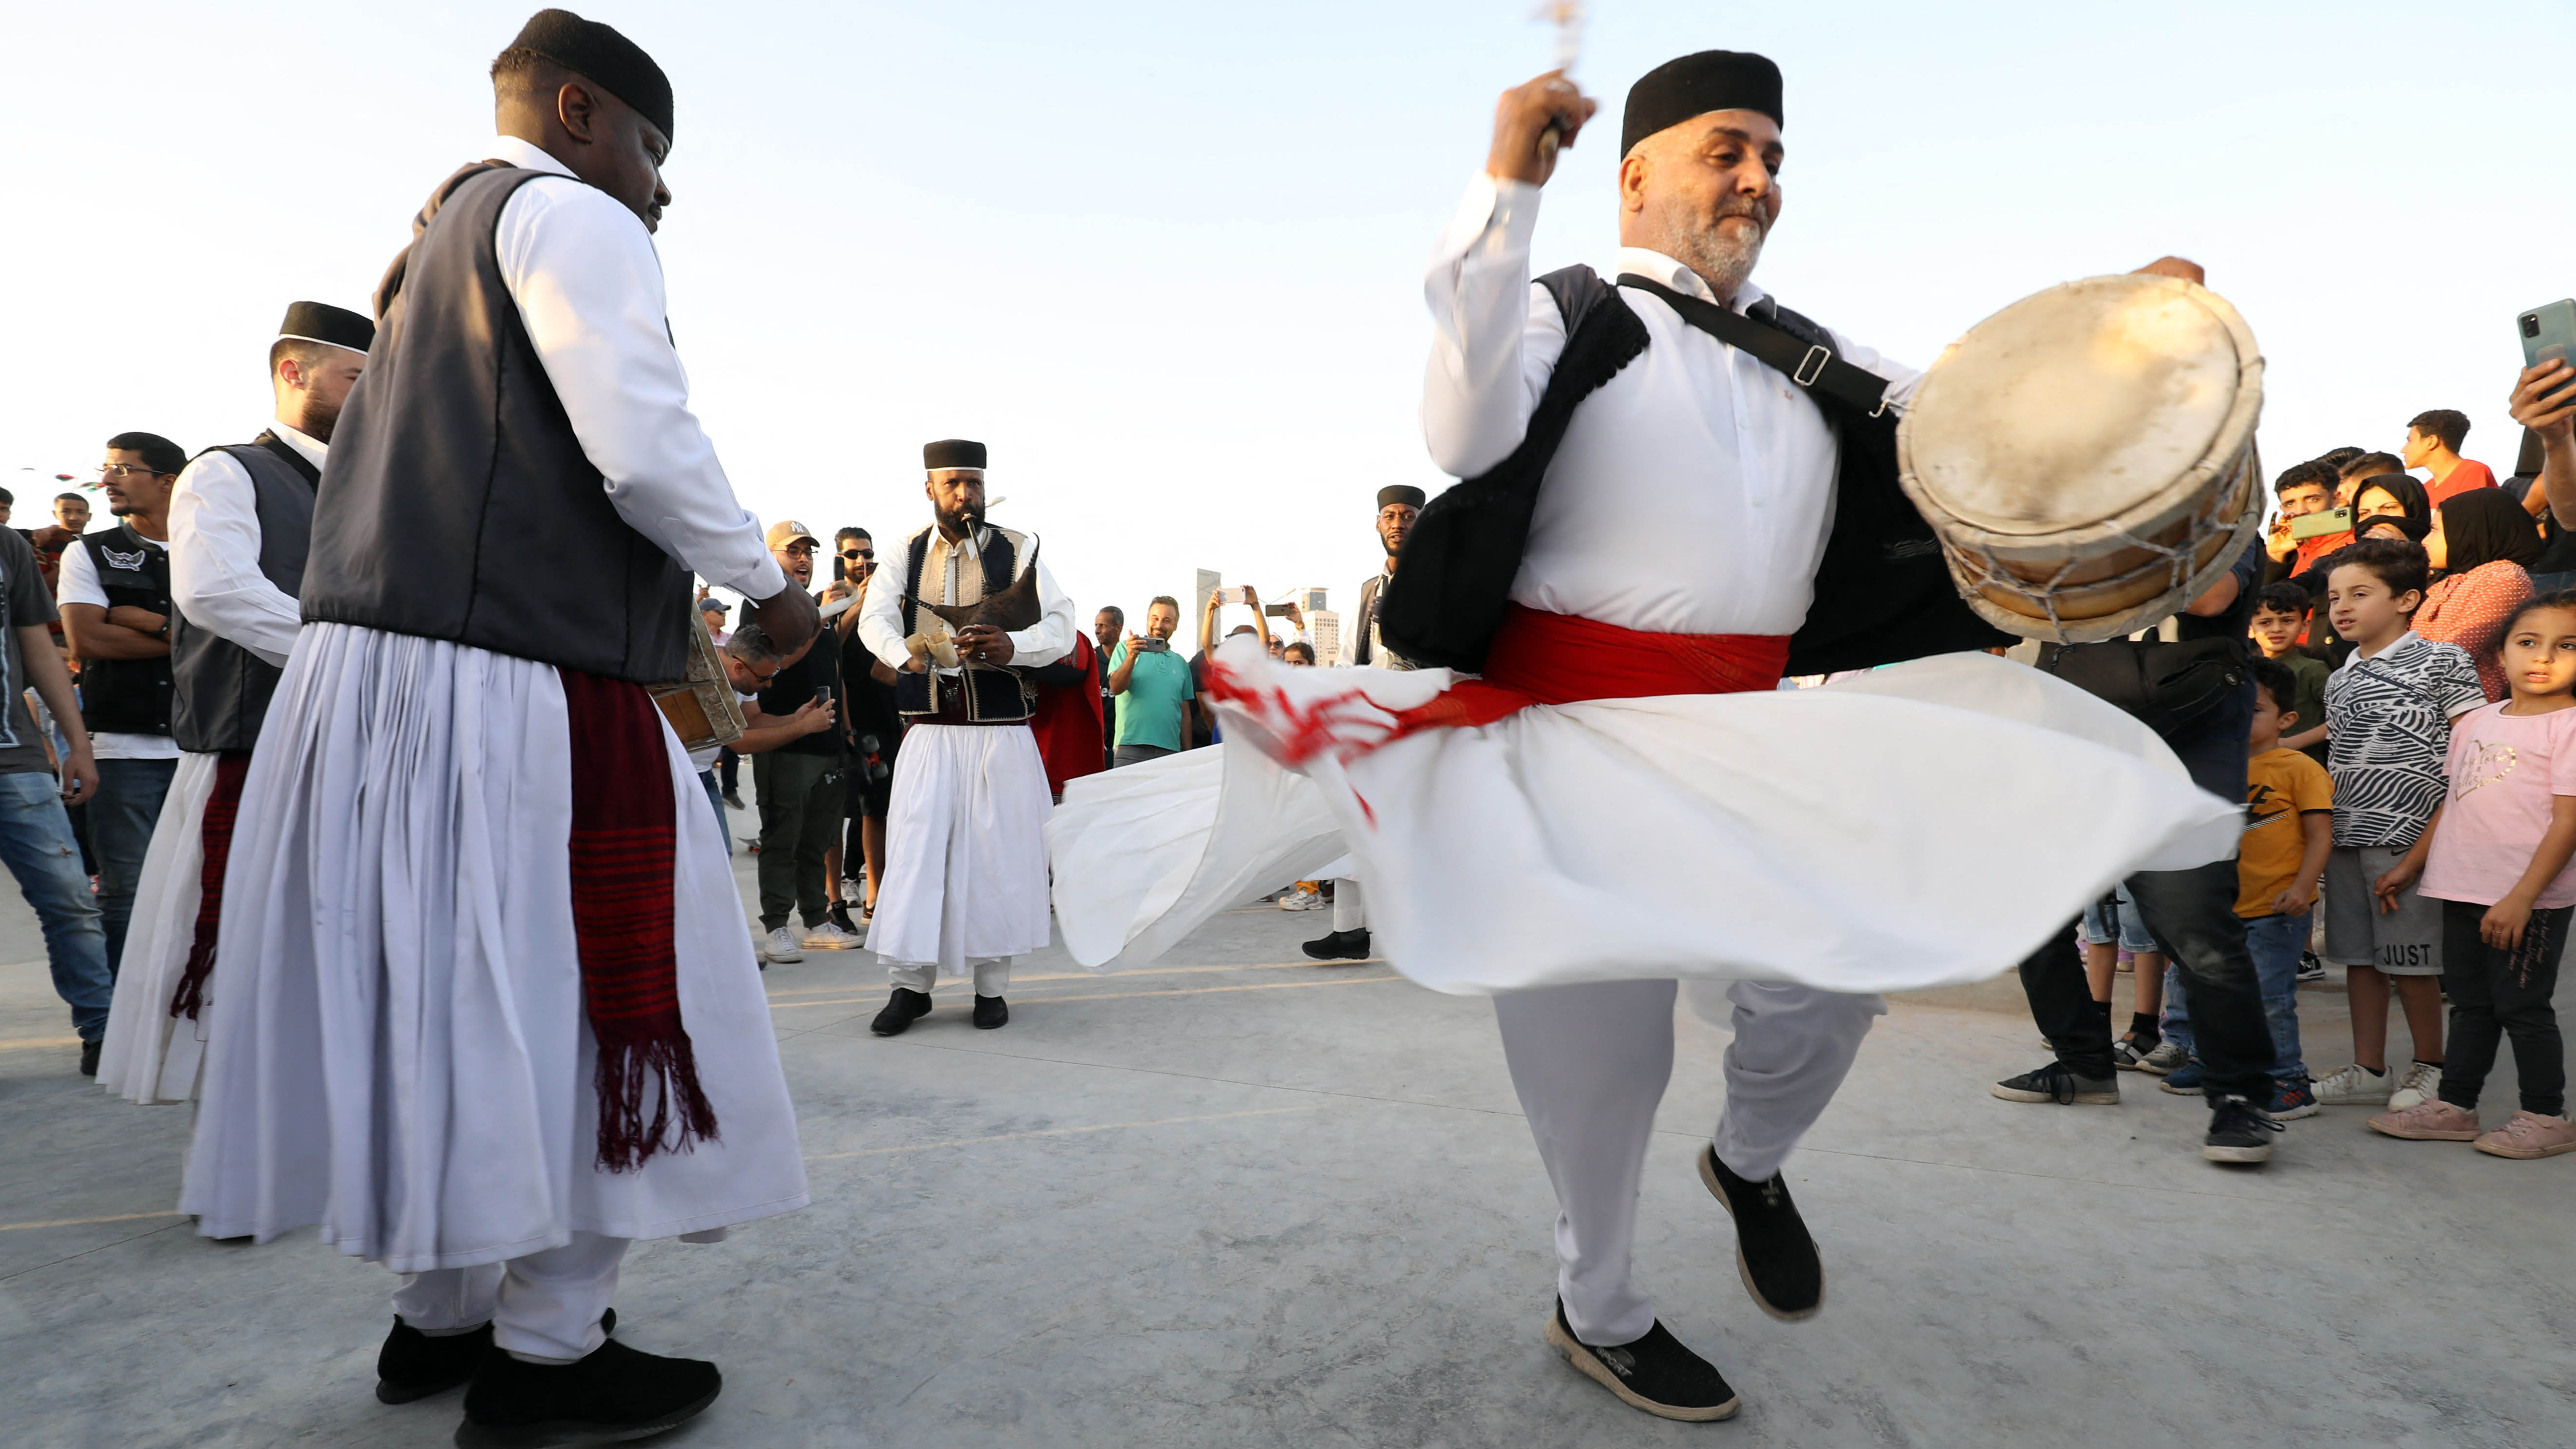 Libyan musicians performed during the inauguration of the skatepark, a first in the country (photo: Mahmud Turkia/AFP)